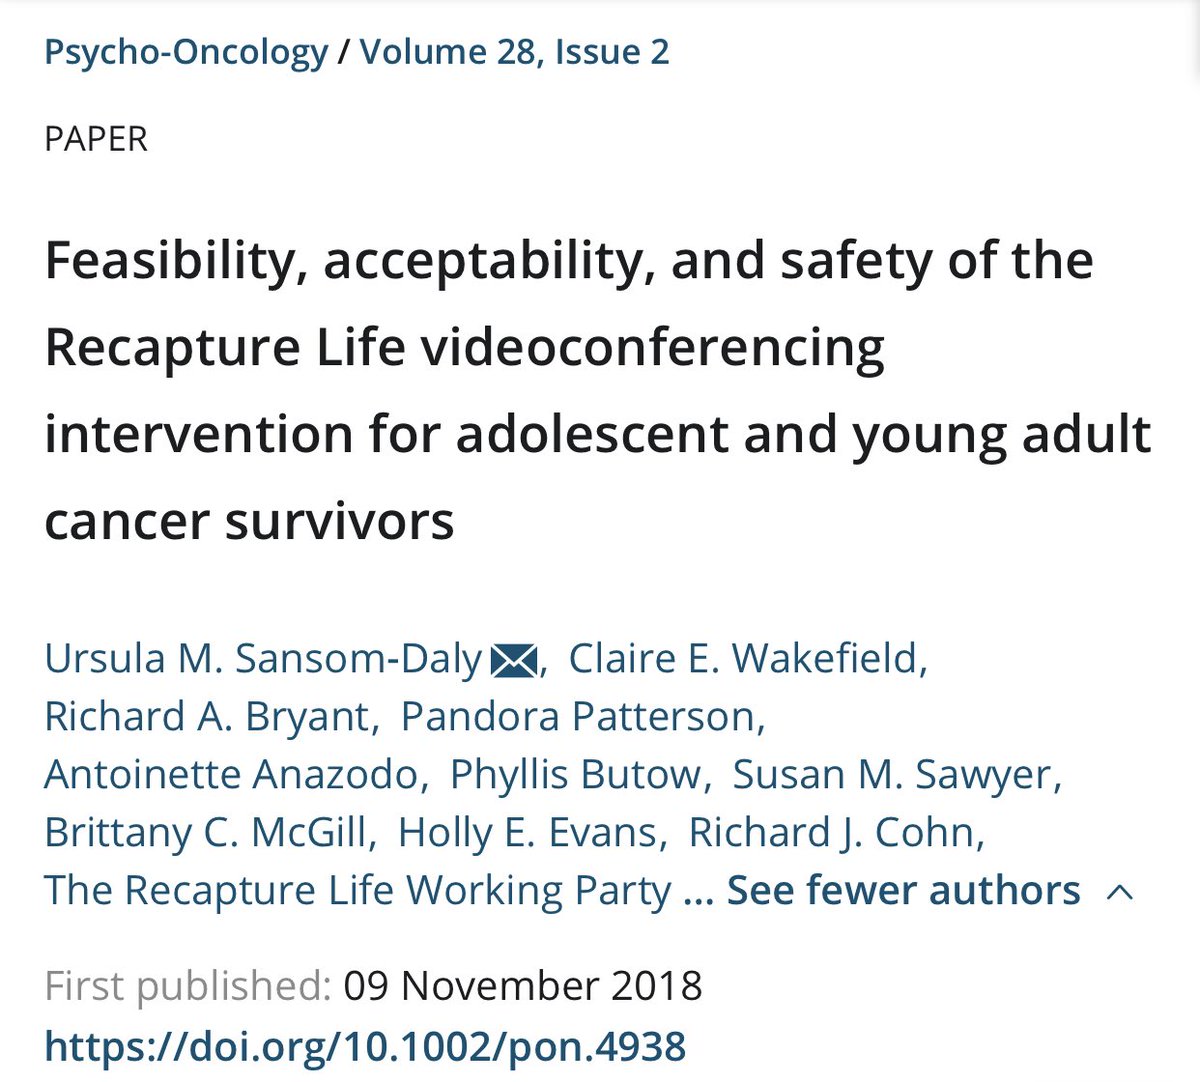 So there are pros/cons, risks & benefits. Worth remembering:  #telehealth may help some ppl access psych support who otherwise would not have. In our Recapture Life online  #CBT trial 49% were young men- pretty unheard of in  #MentalHealth research!  https://doi.org/10.1002/pon.4938 7/